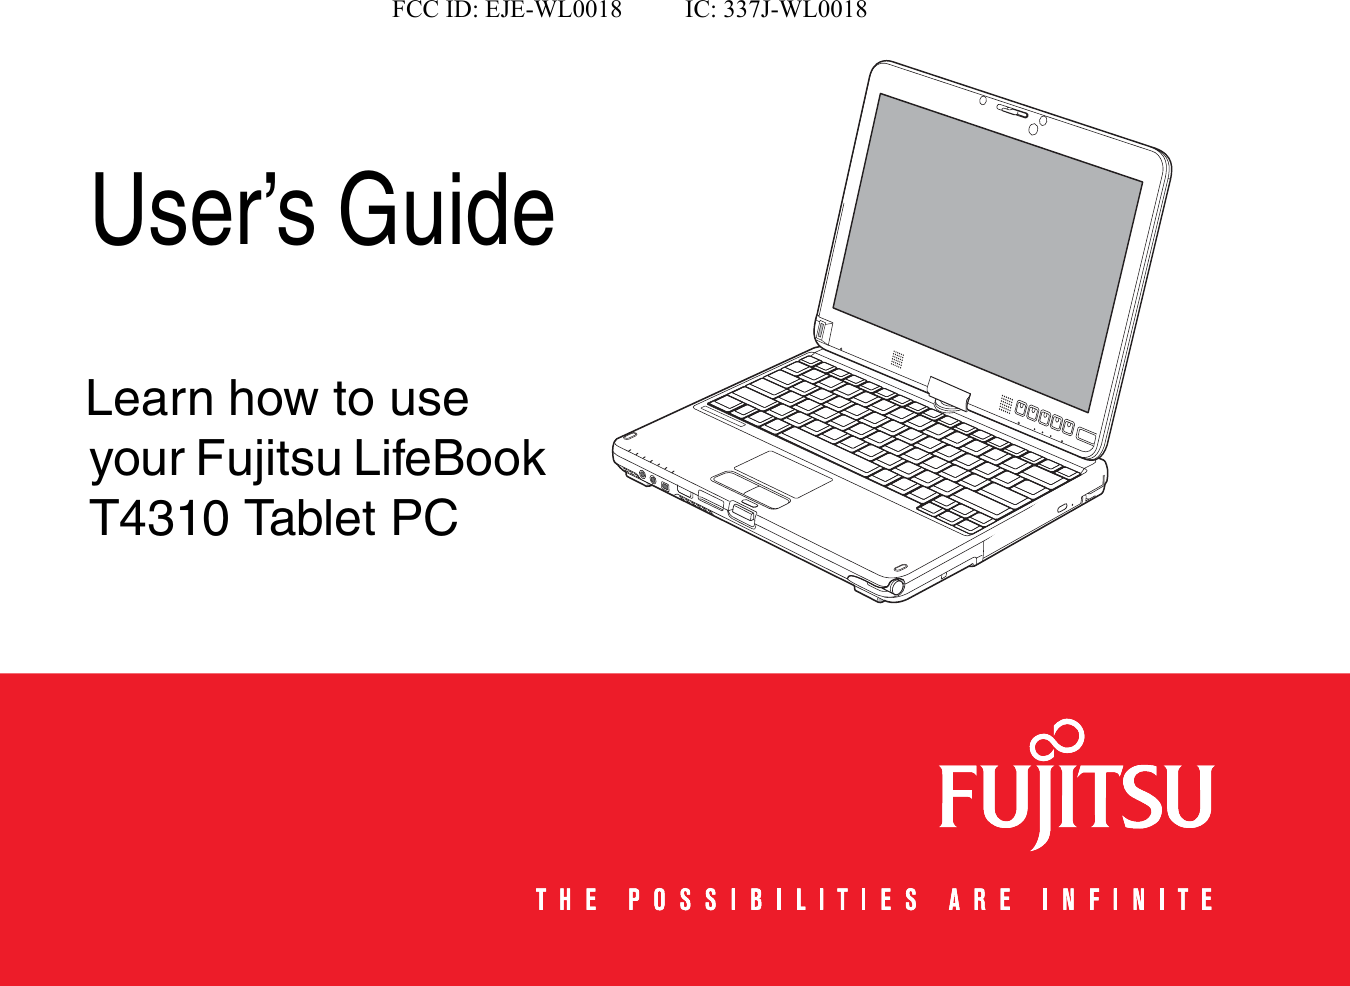                      FCC ID: EJE-WL0018          IC: 337J-WL0018 User’s GuideLearn how to use your Fujitsu LifeBook T410 Tablet PC